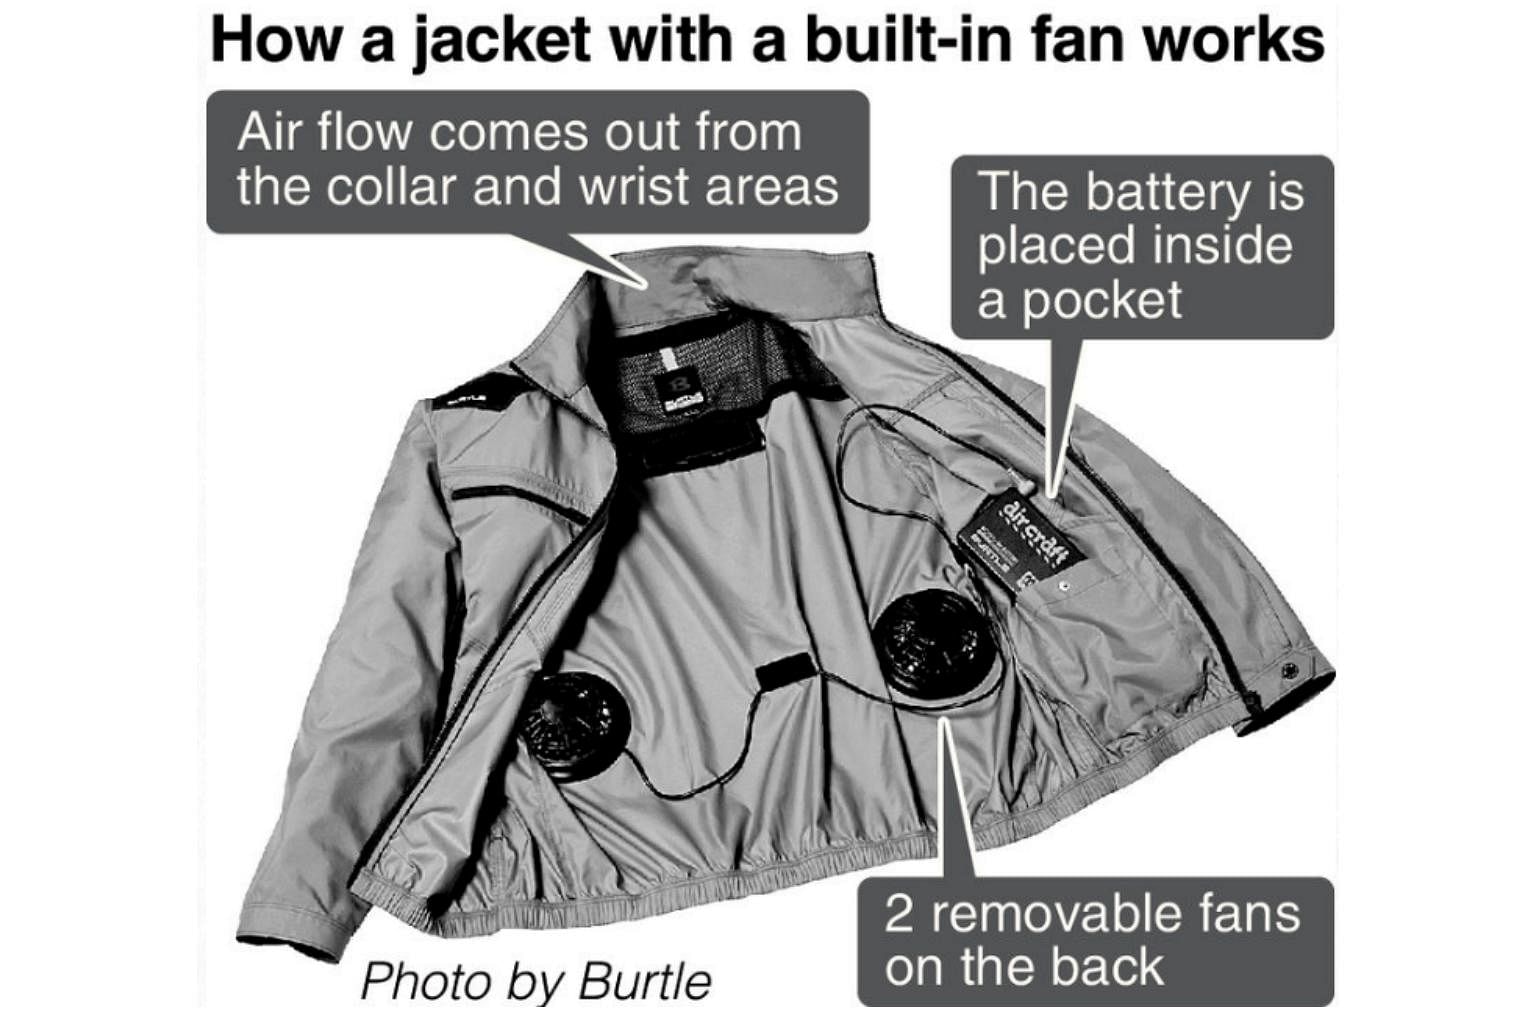 Work uniform with built-in cooling fan also popular as casual wear in Japan...